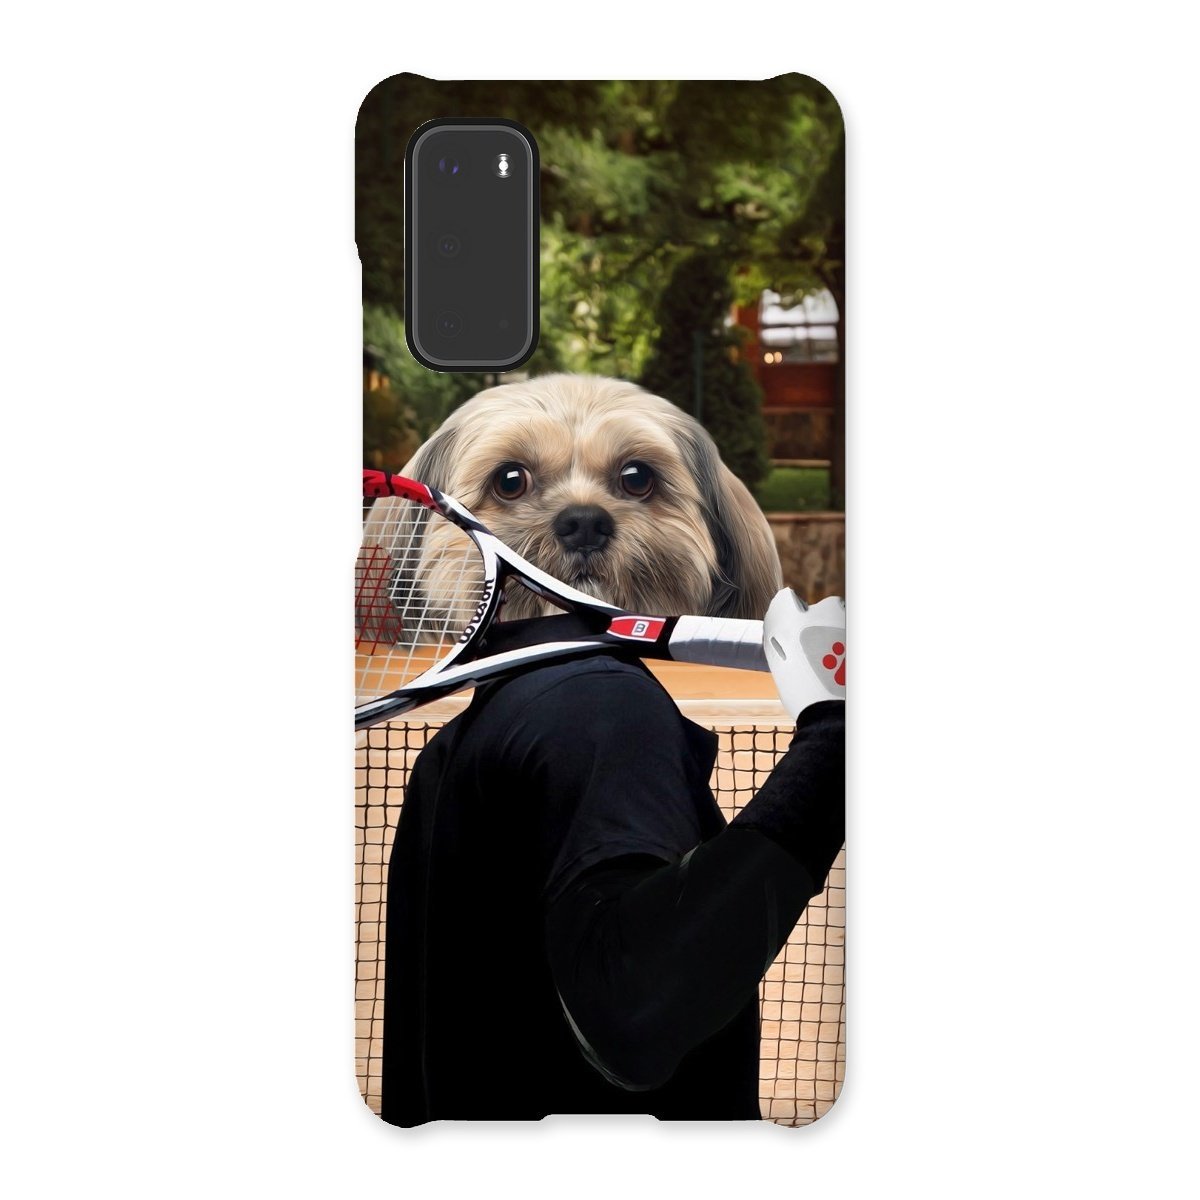 The Tennis Champion: Custom Pet Phone Case - Paw & Glory - paw and glory, personalized dog phone case, pet phone case, personalised dog phone case uk, personalised cat phone case, dog phone case custom, personalised iphone 11 case dogs, Pet Portraits phone case,